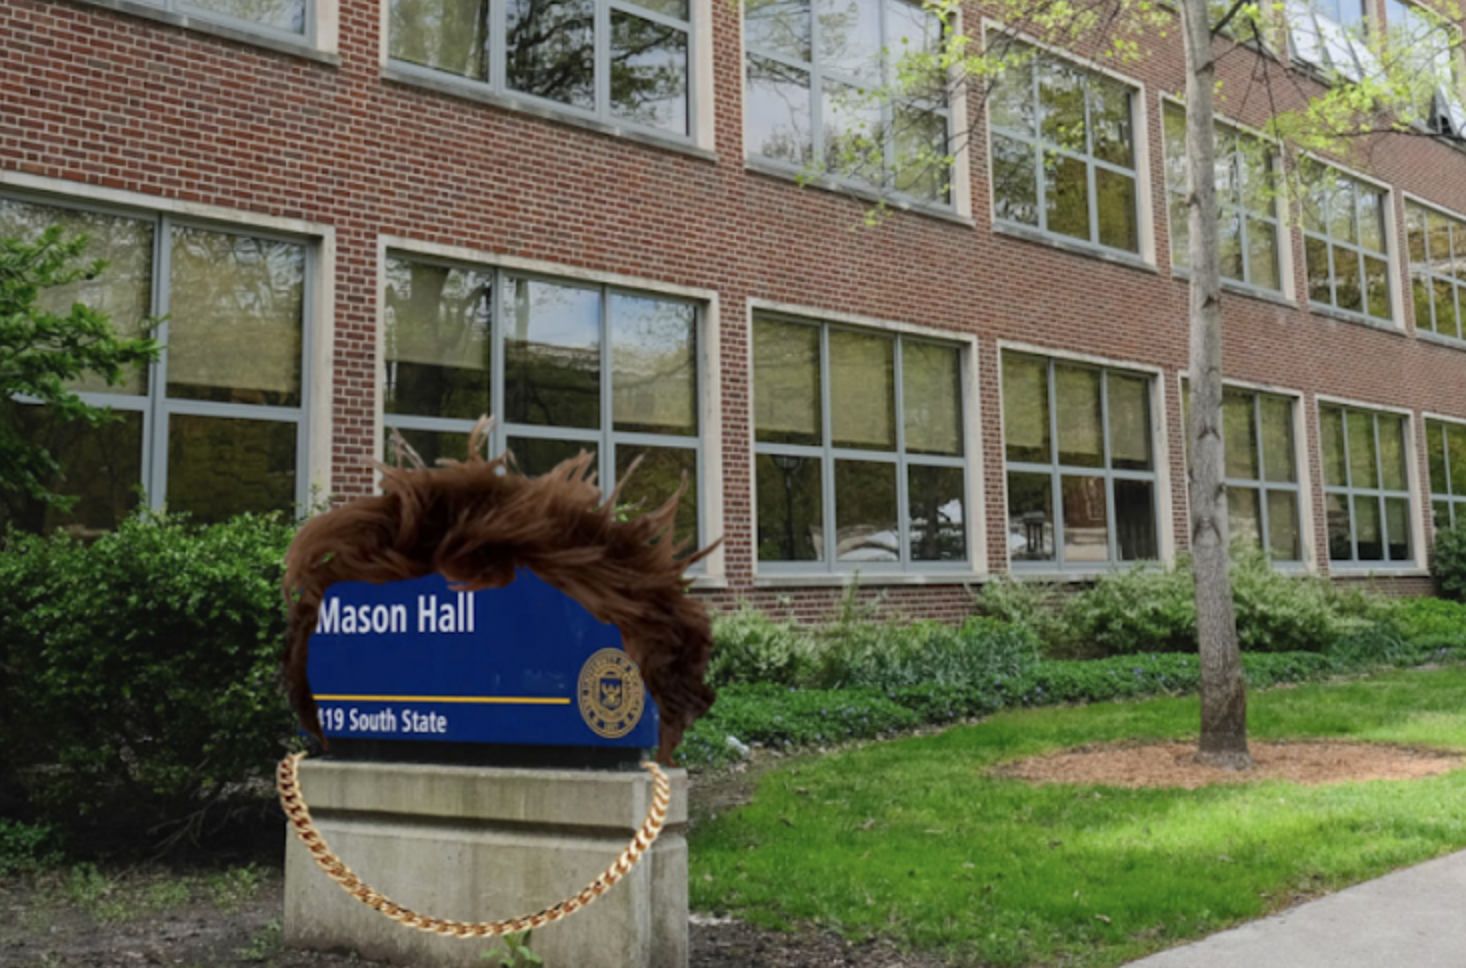 The Mason Hall sign with fluffy brown hair wearing a chain.